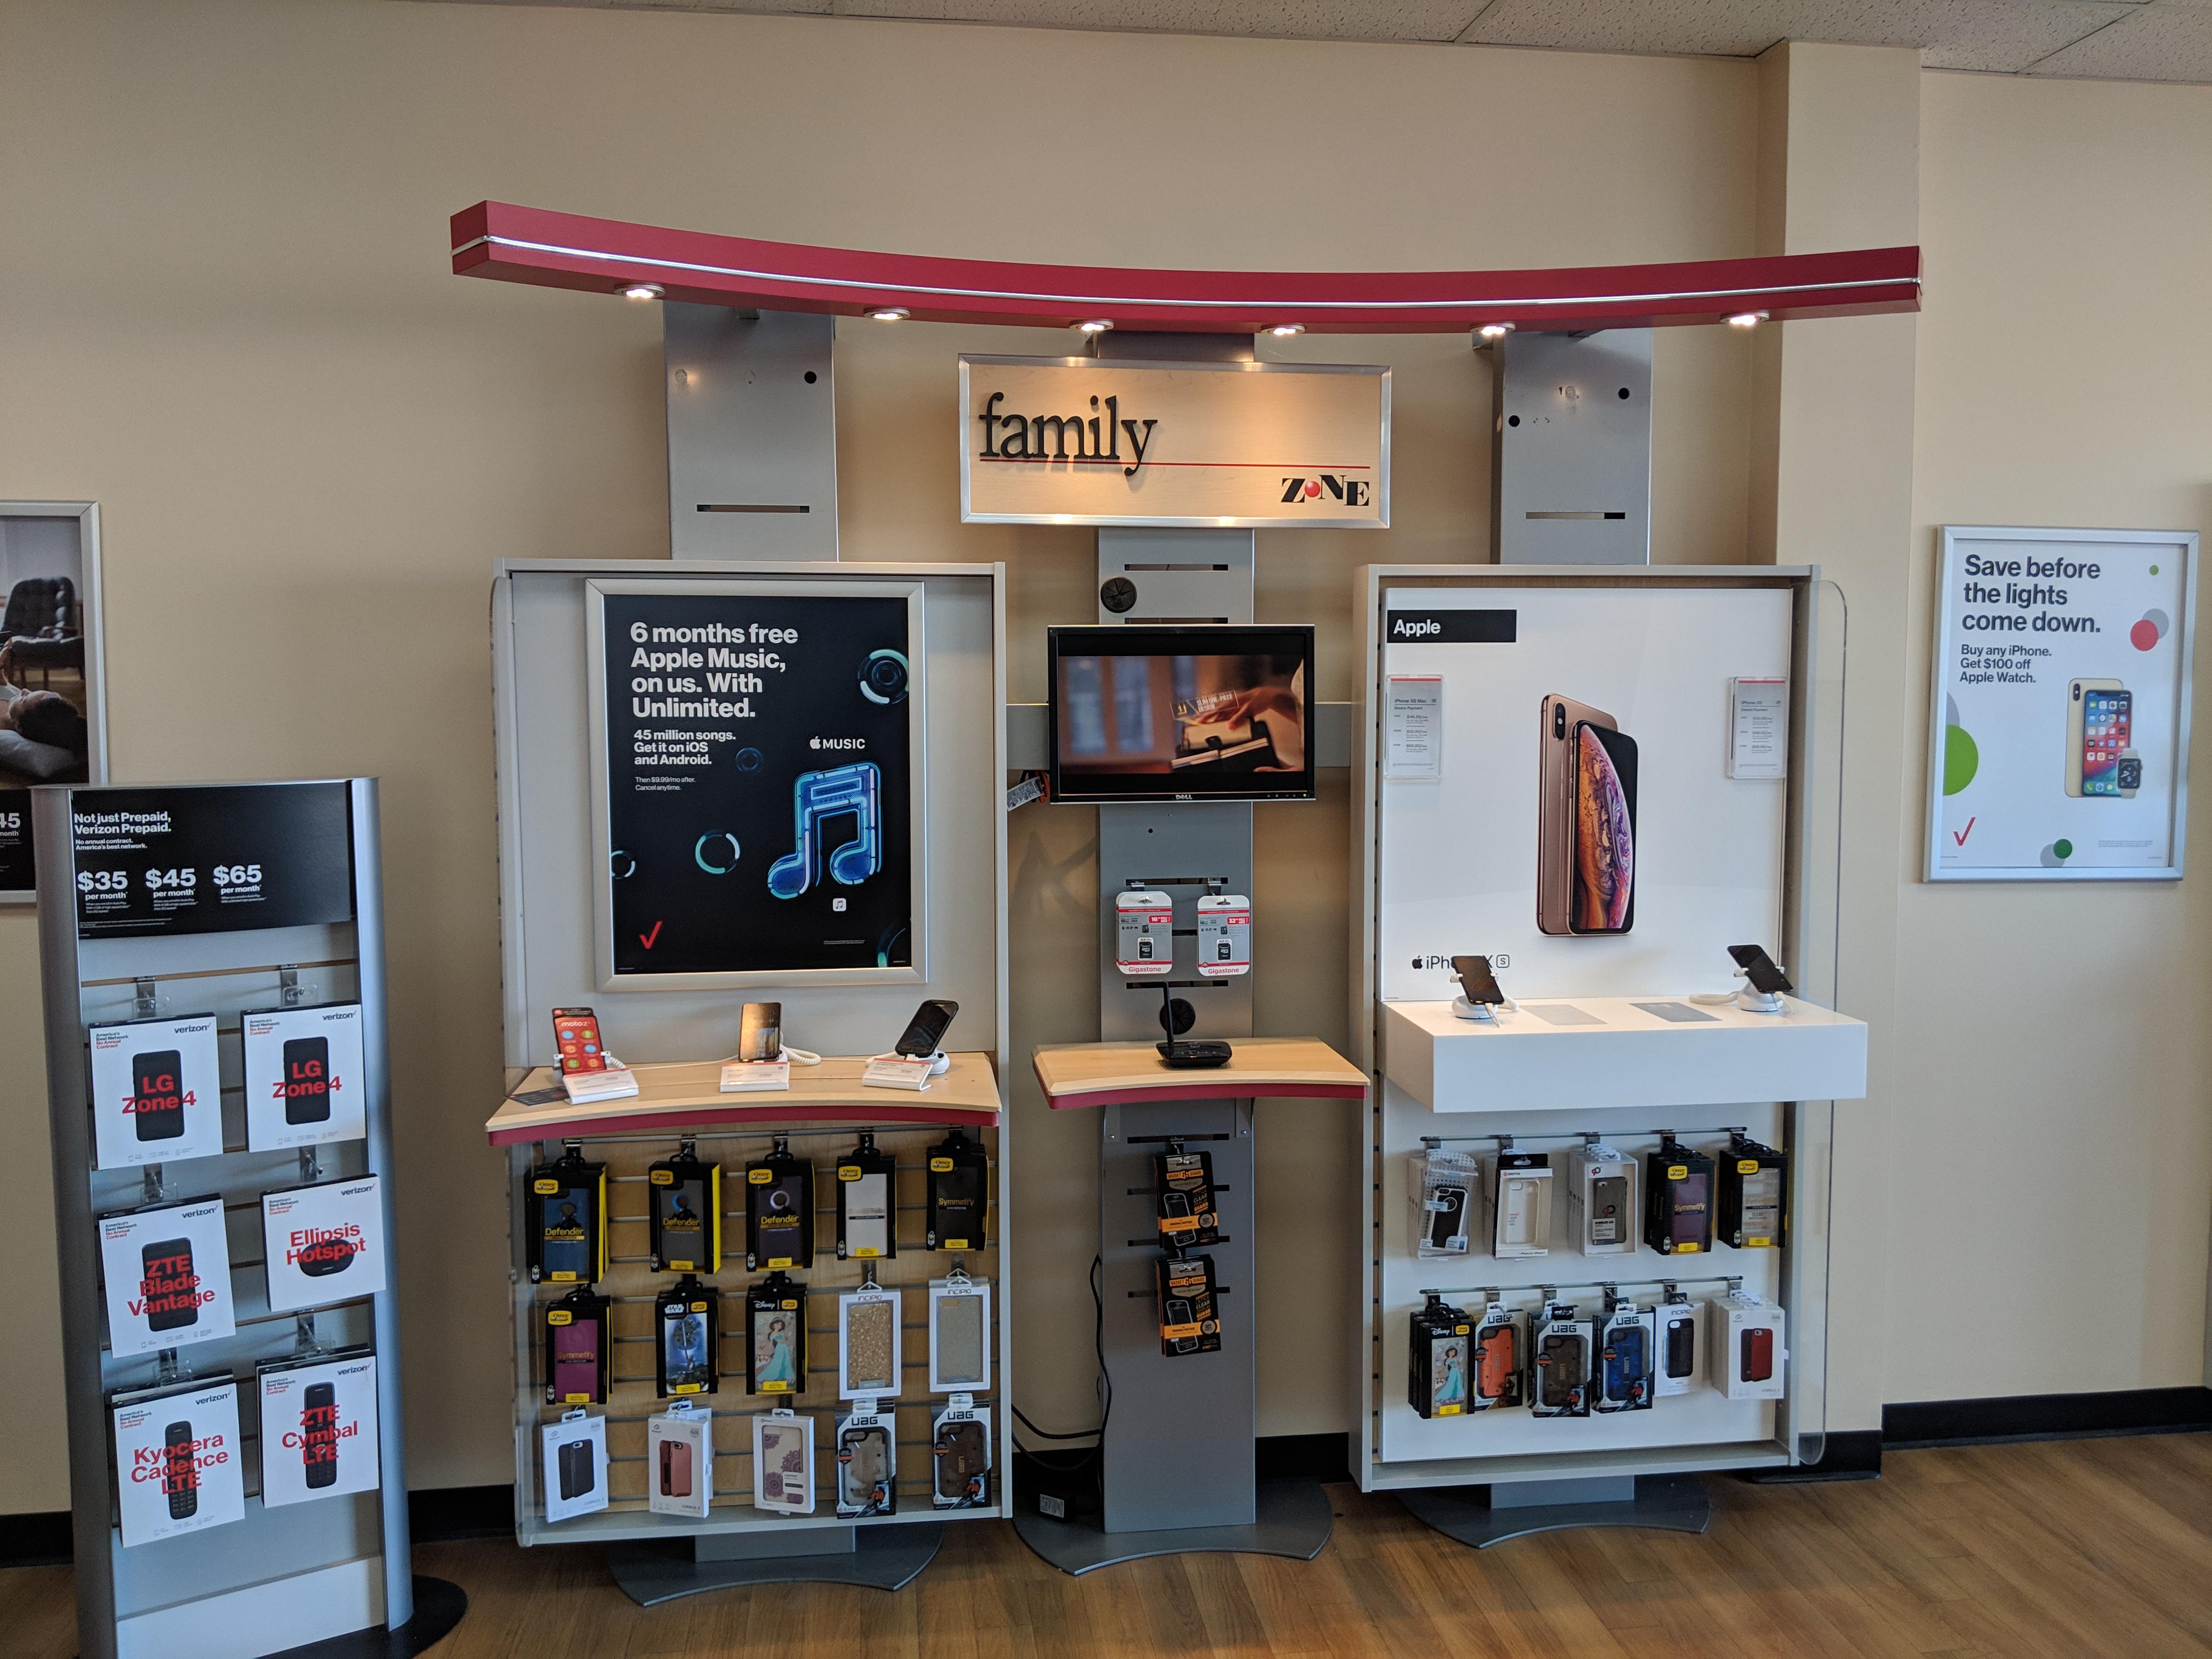 Wireless Zone® of Raymond invites you to come see our new look and learn about all our wireless offers!